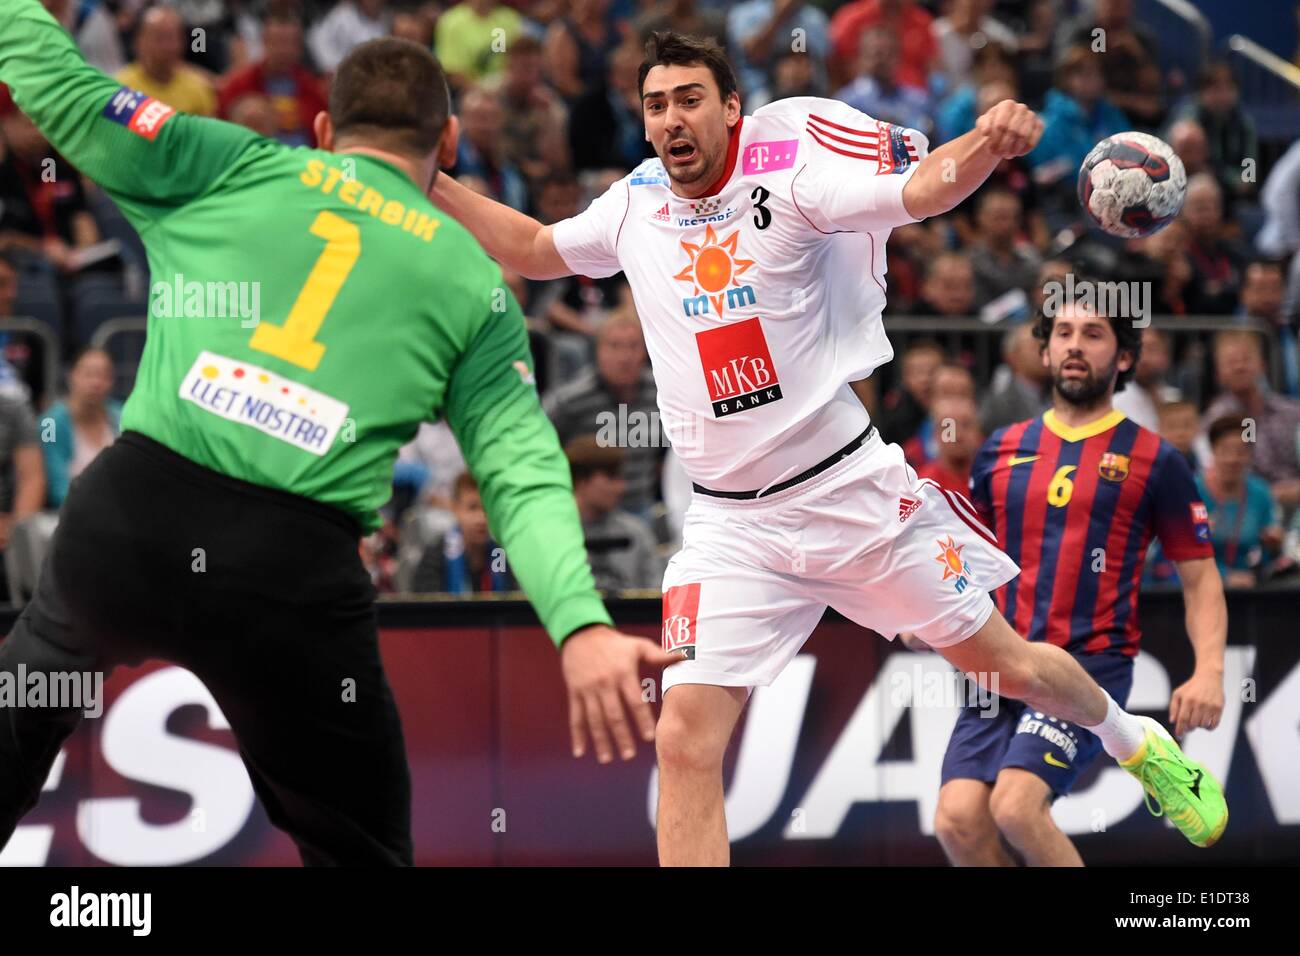 Cologne, Germany. 01st June, 2014. Barcelona's goalkeeper Arpad Sterbik (L) and Veszprem's Peter Gulyas in action during the Champions League EHF Final Four handball match for third place between MKB-MVM Veszprem and FC Barcelona at Lanxess Arena in Cologne, Germany, 01 June 2014. Photo: MARIUS BECKER/dpa/Alamy Live News Stock Photo